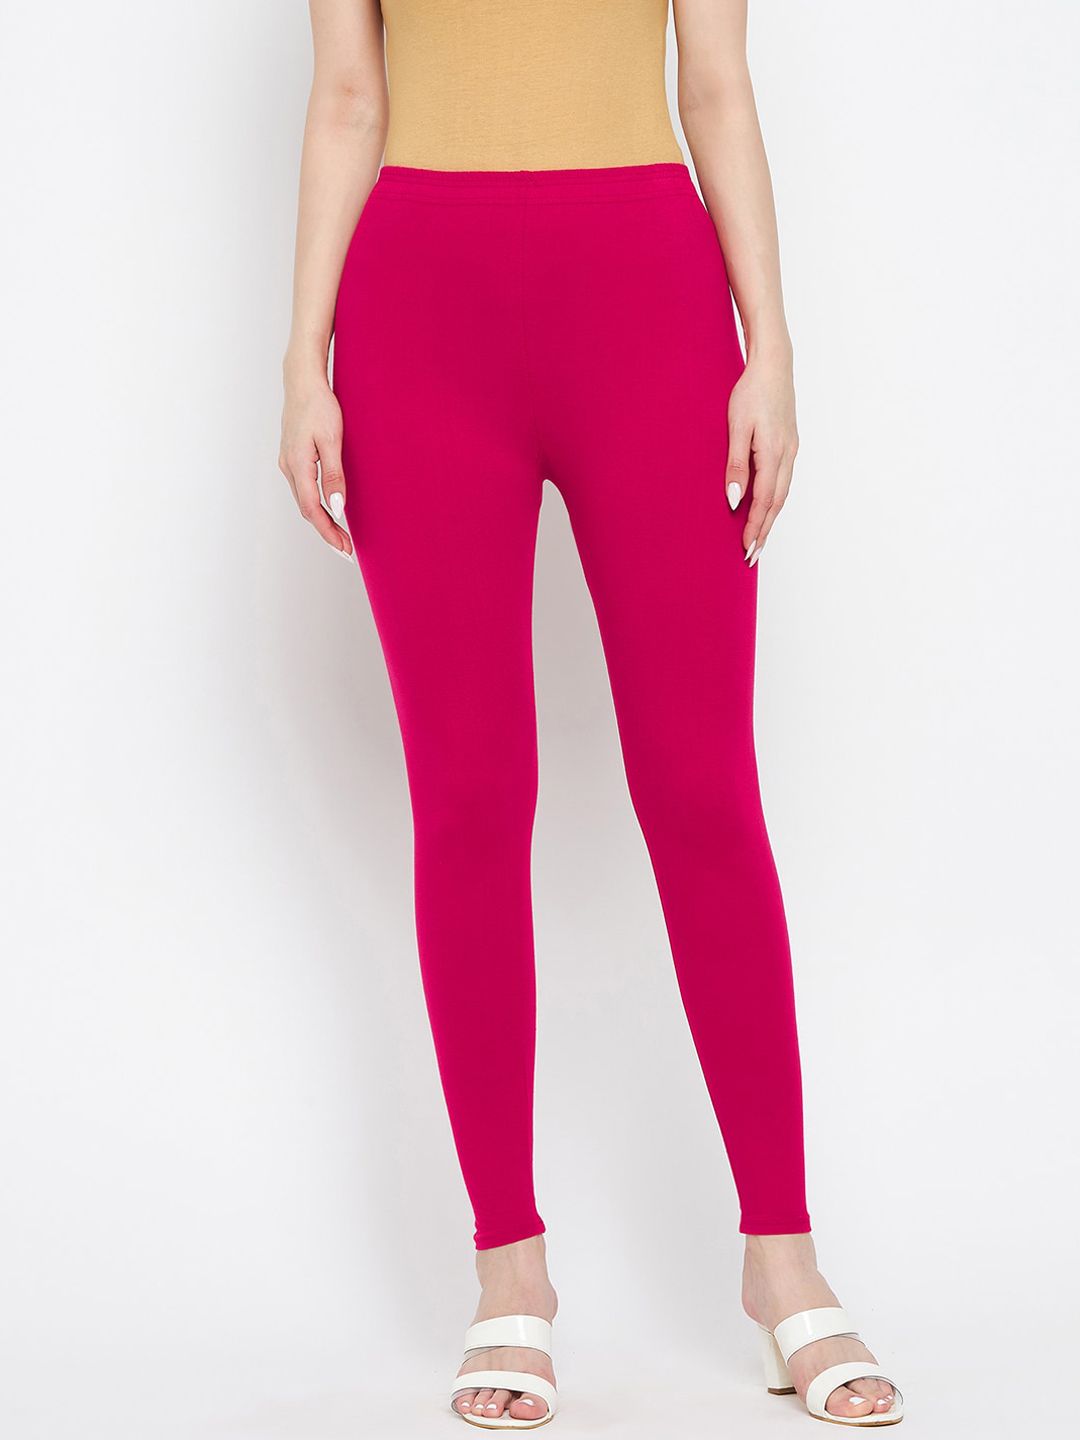 Clora Creation Women Magenta Solid Ankle-Length Cotton Leggings Price in India